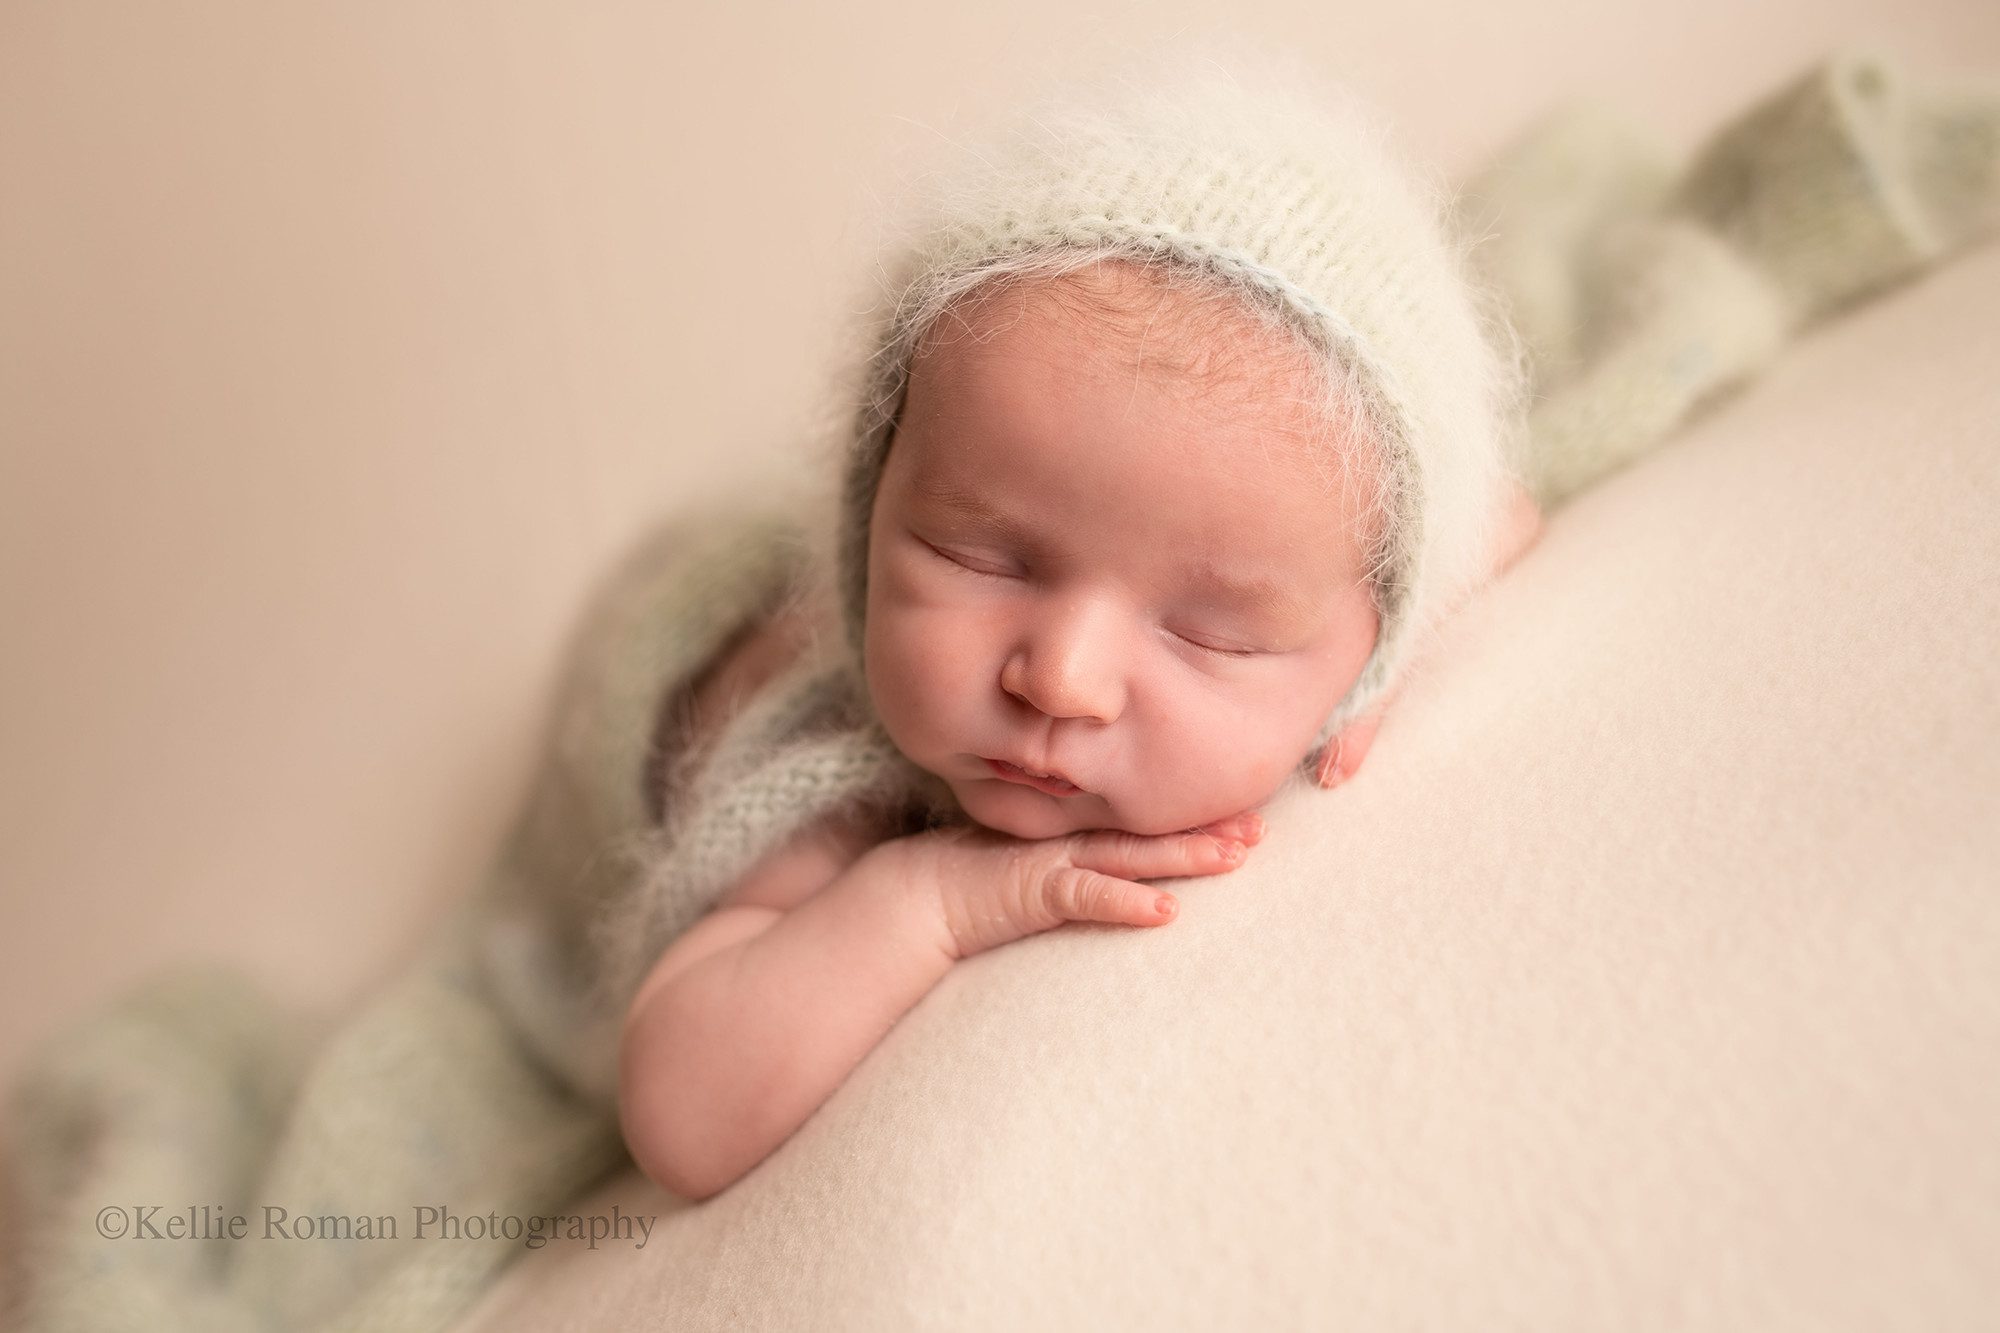 sweet and simple newborn. A newborn boy is in a milwaukee photo studio. He is laying on his belly on a cream backdrop with his hands under his chin. He is sleeping wand has a fuzzy light mint bonnet on, and a matching wrap covering his diaper.